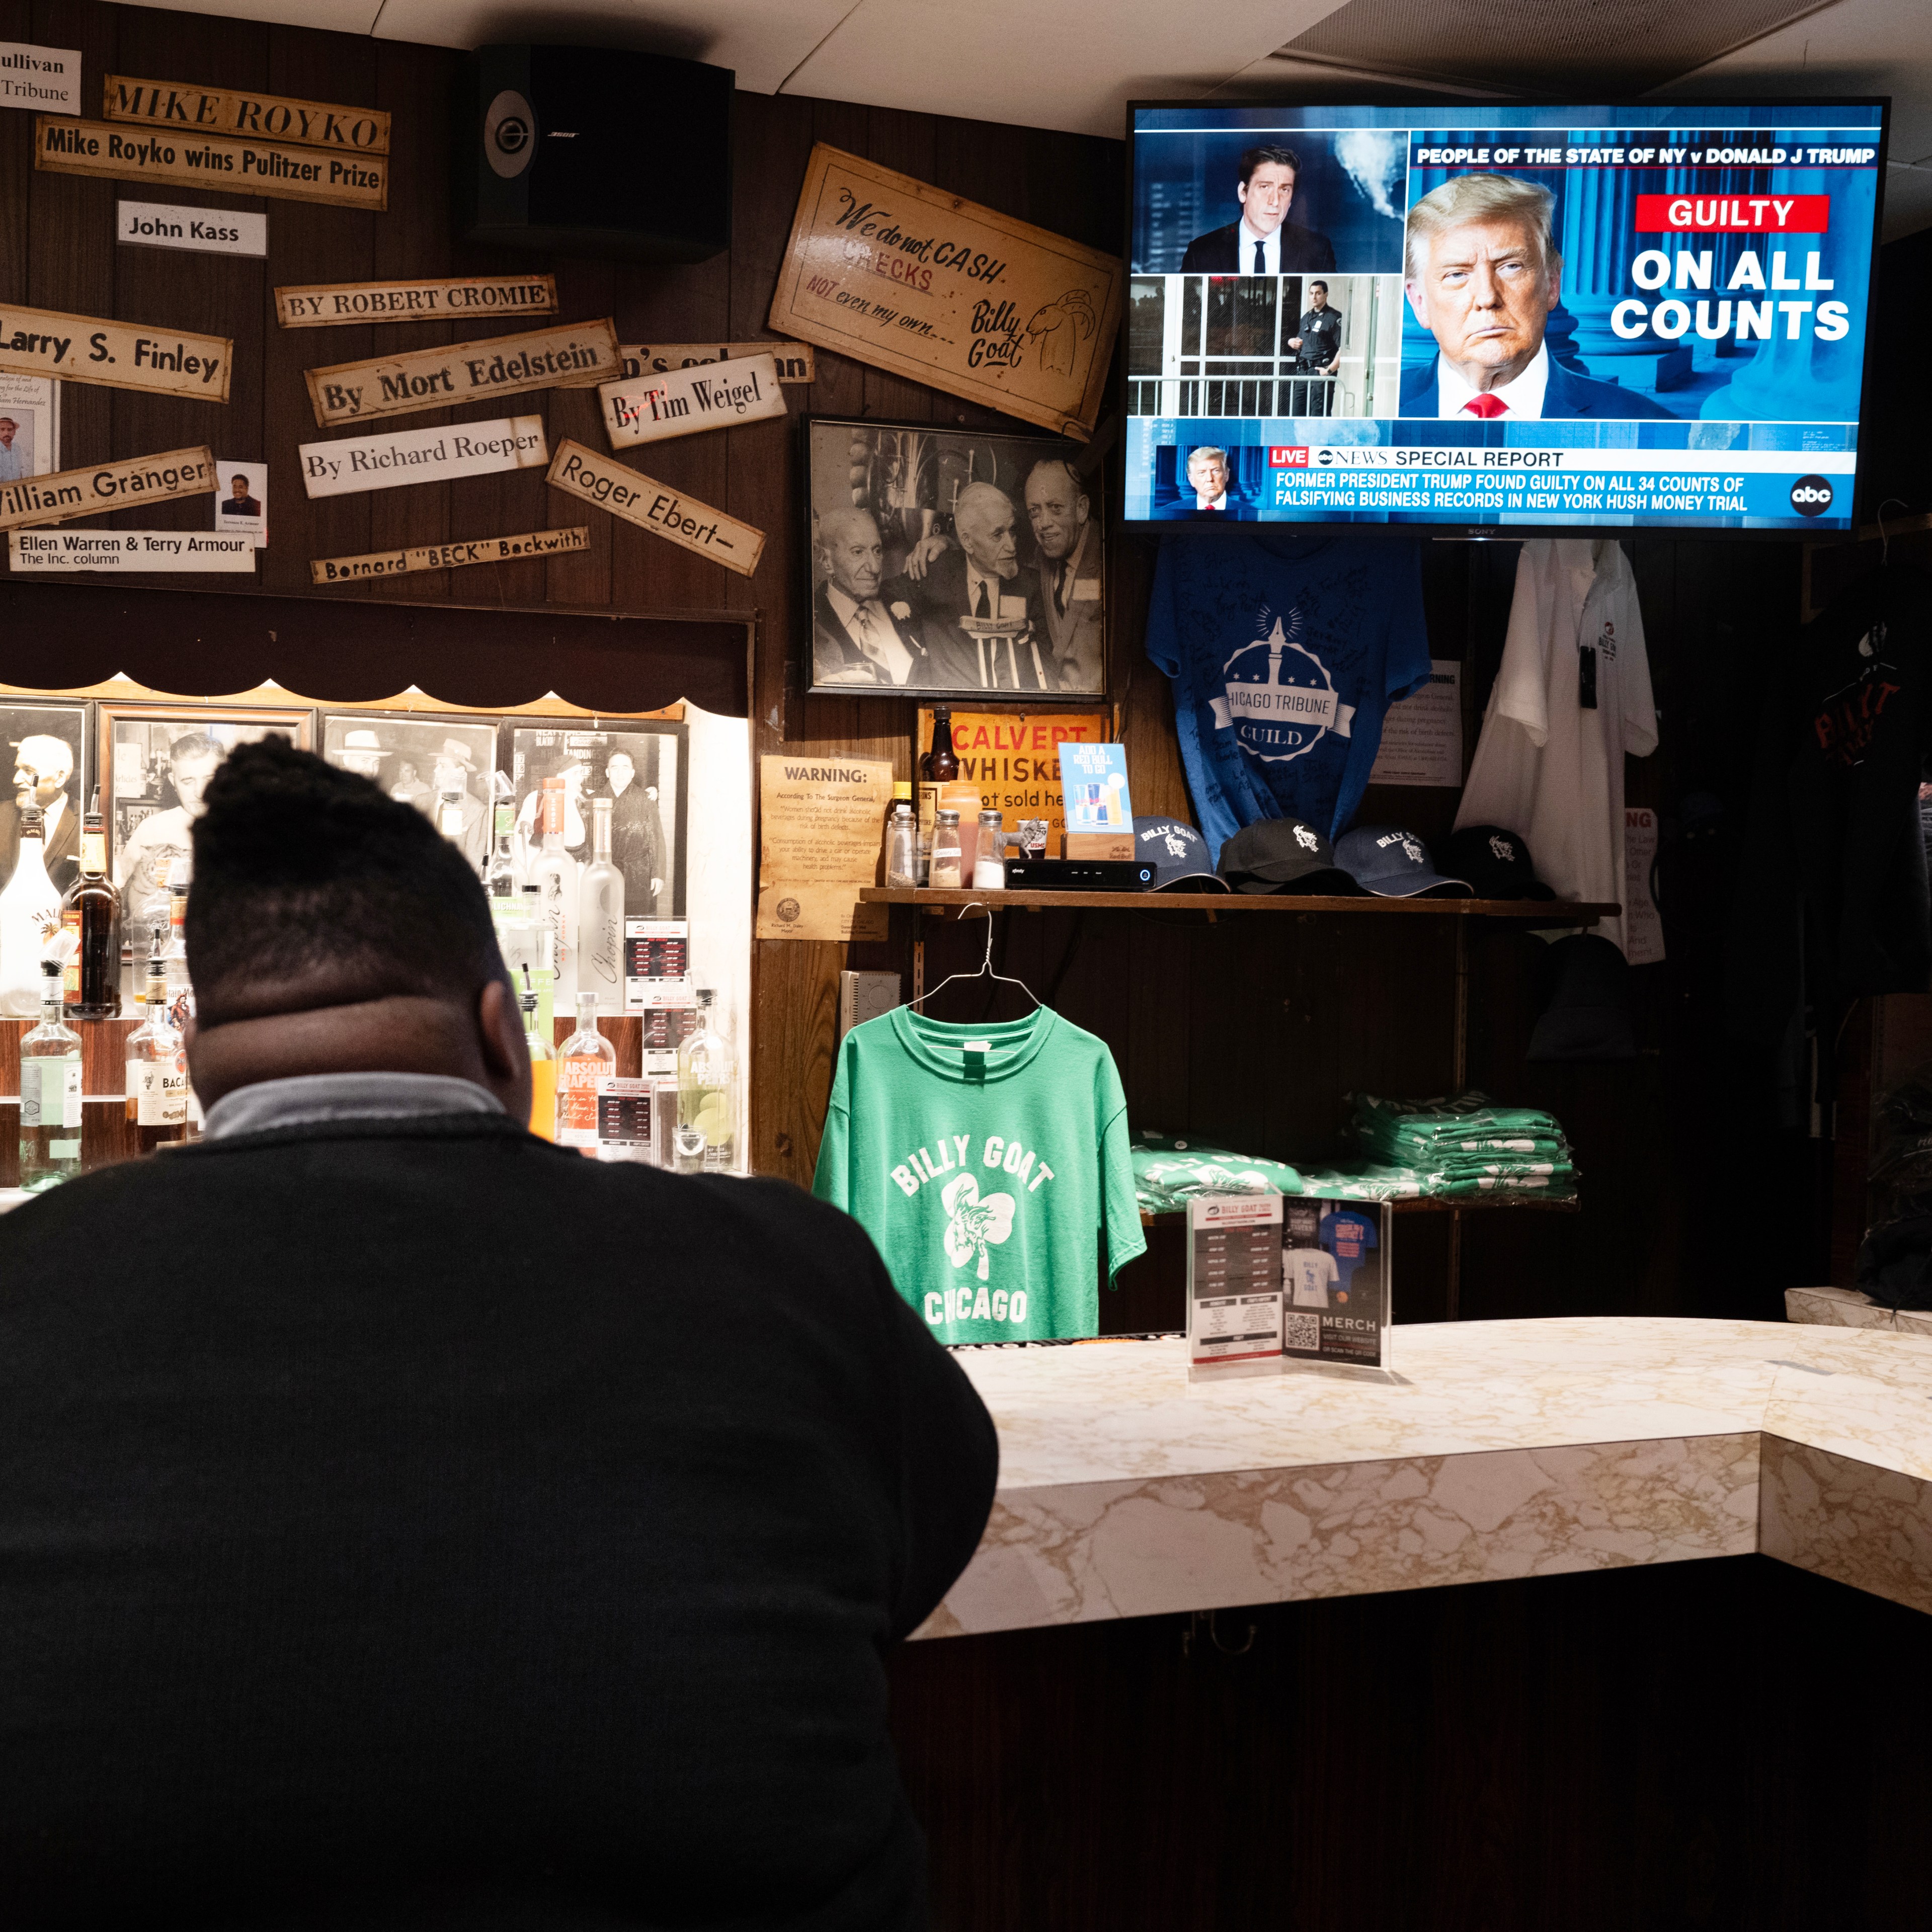 A person seated at a bar watches a TV showing news of Donald Trump found guilty on all counts. The bar has memorabilia and merchandise like hats and shirts.